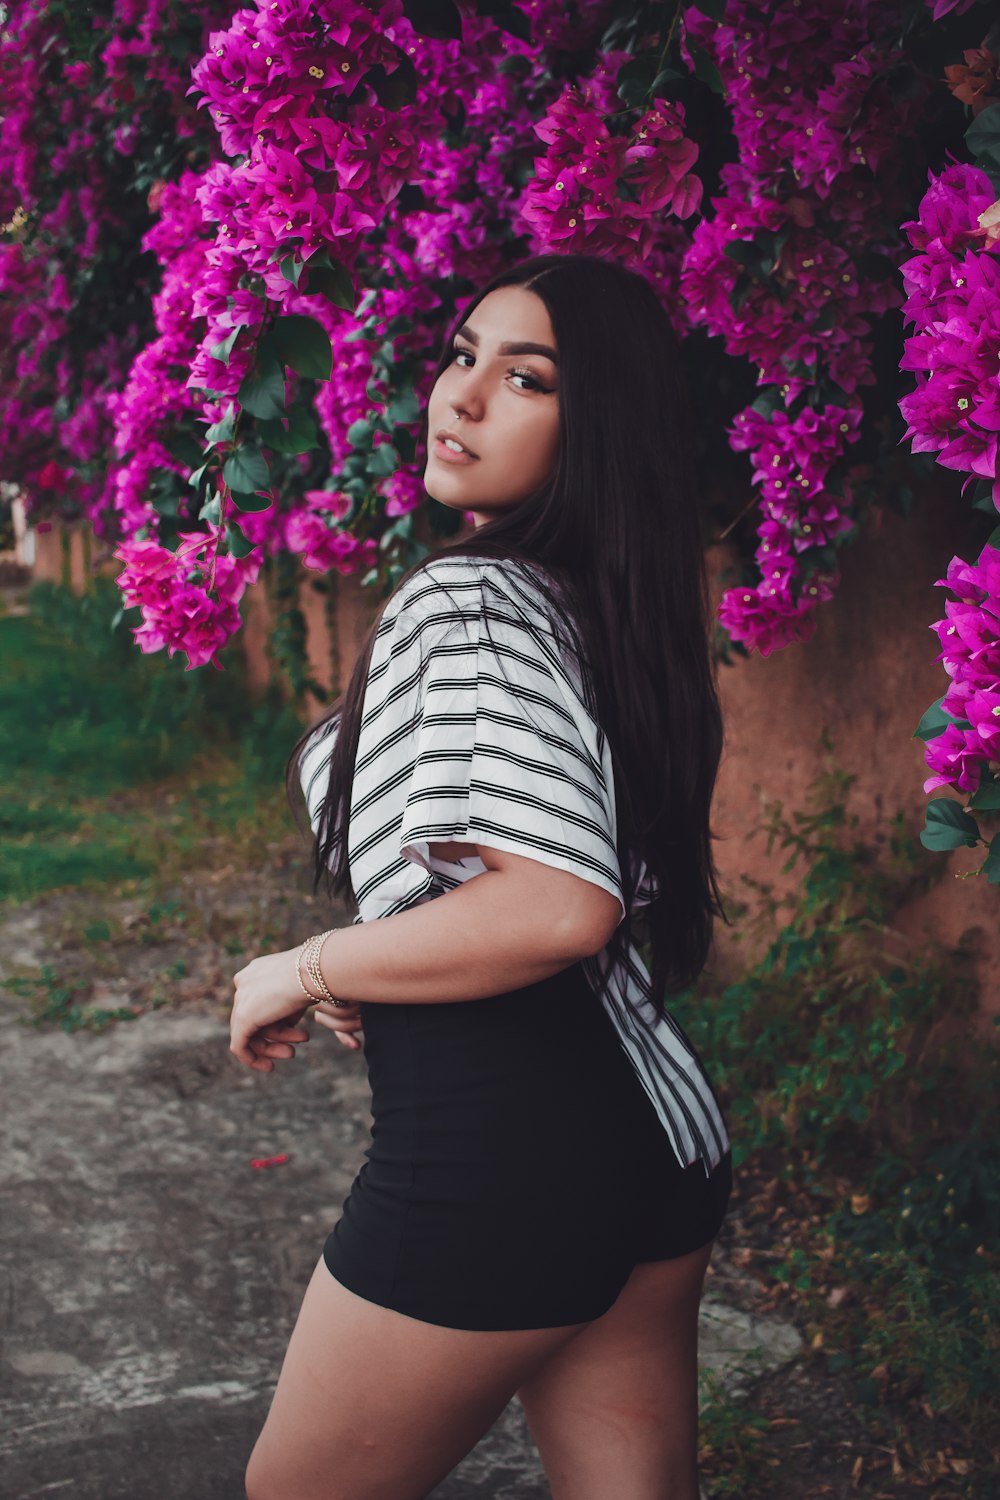 woman in black and white striped shirt standing near purple flowers